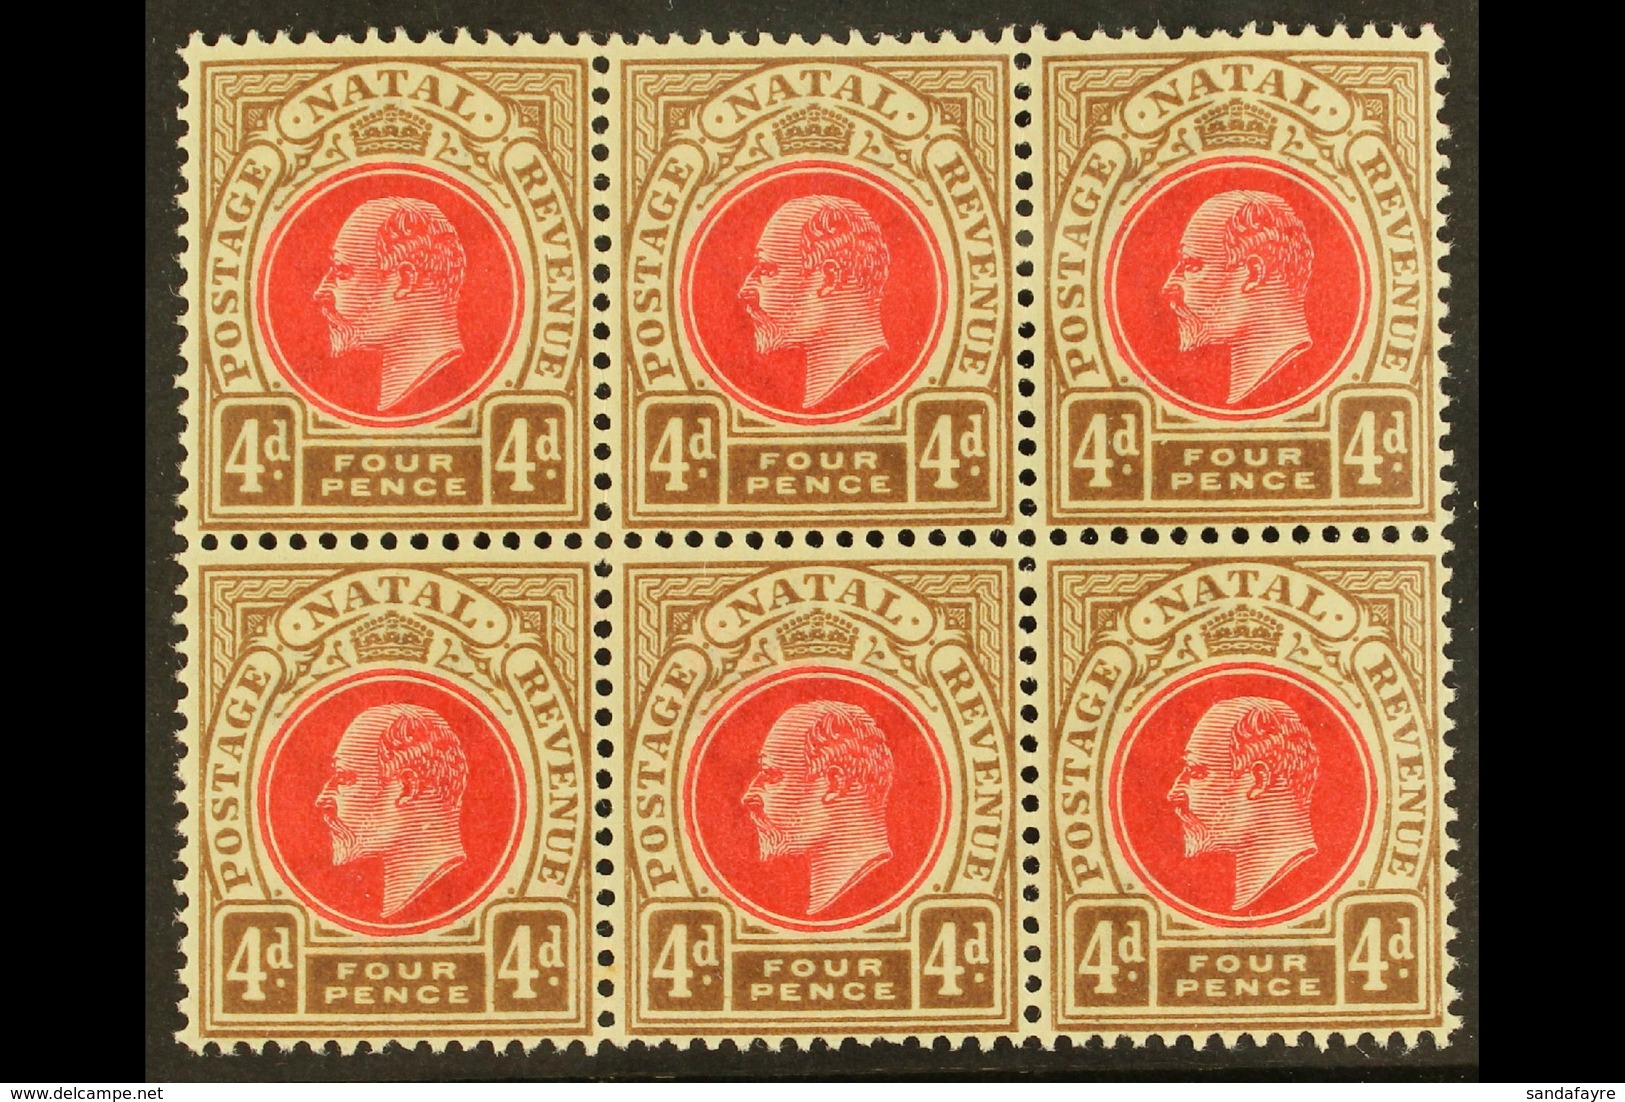 NATAL 1902-3 4d Carmine & Cinnamon, Wmk Crown CA , BLOCK OF SIX, SG 133, Very Slightly Toned Gum, Otherwise Never Hinged - Ohne Zuordnung